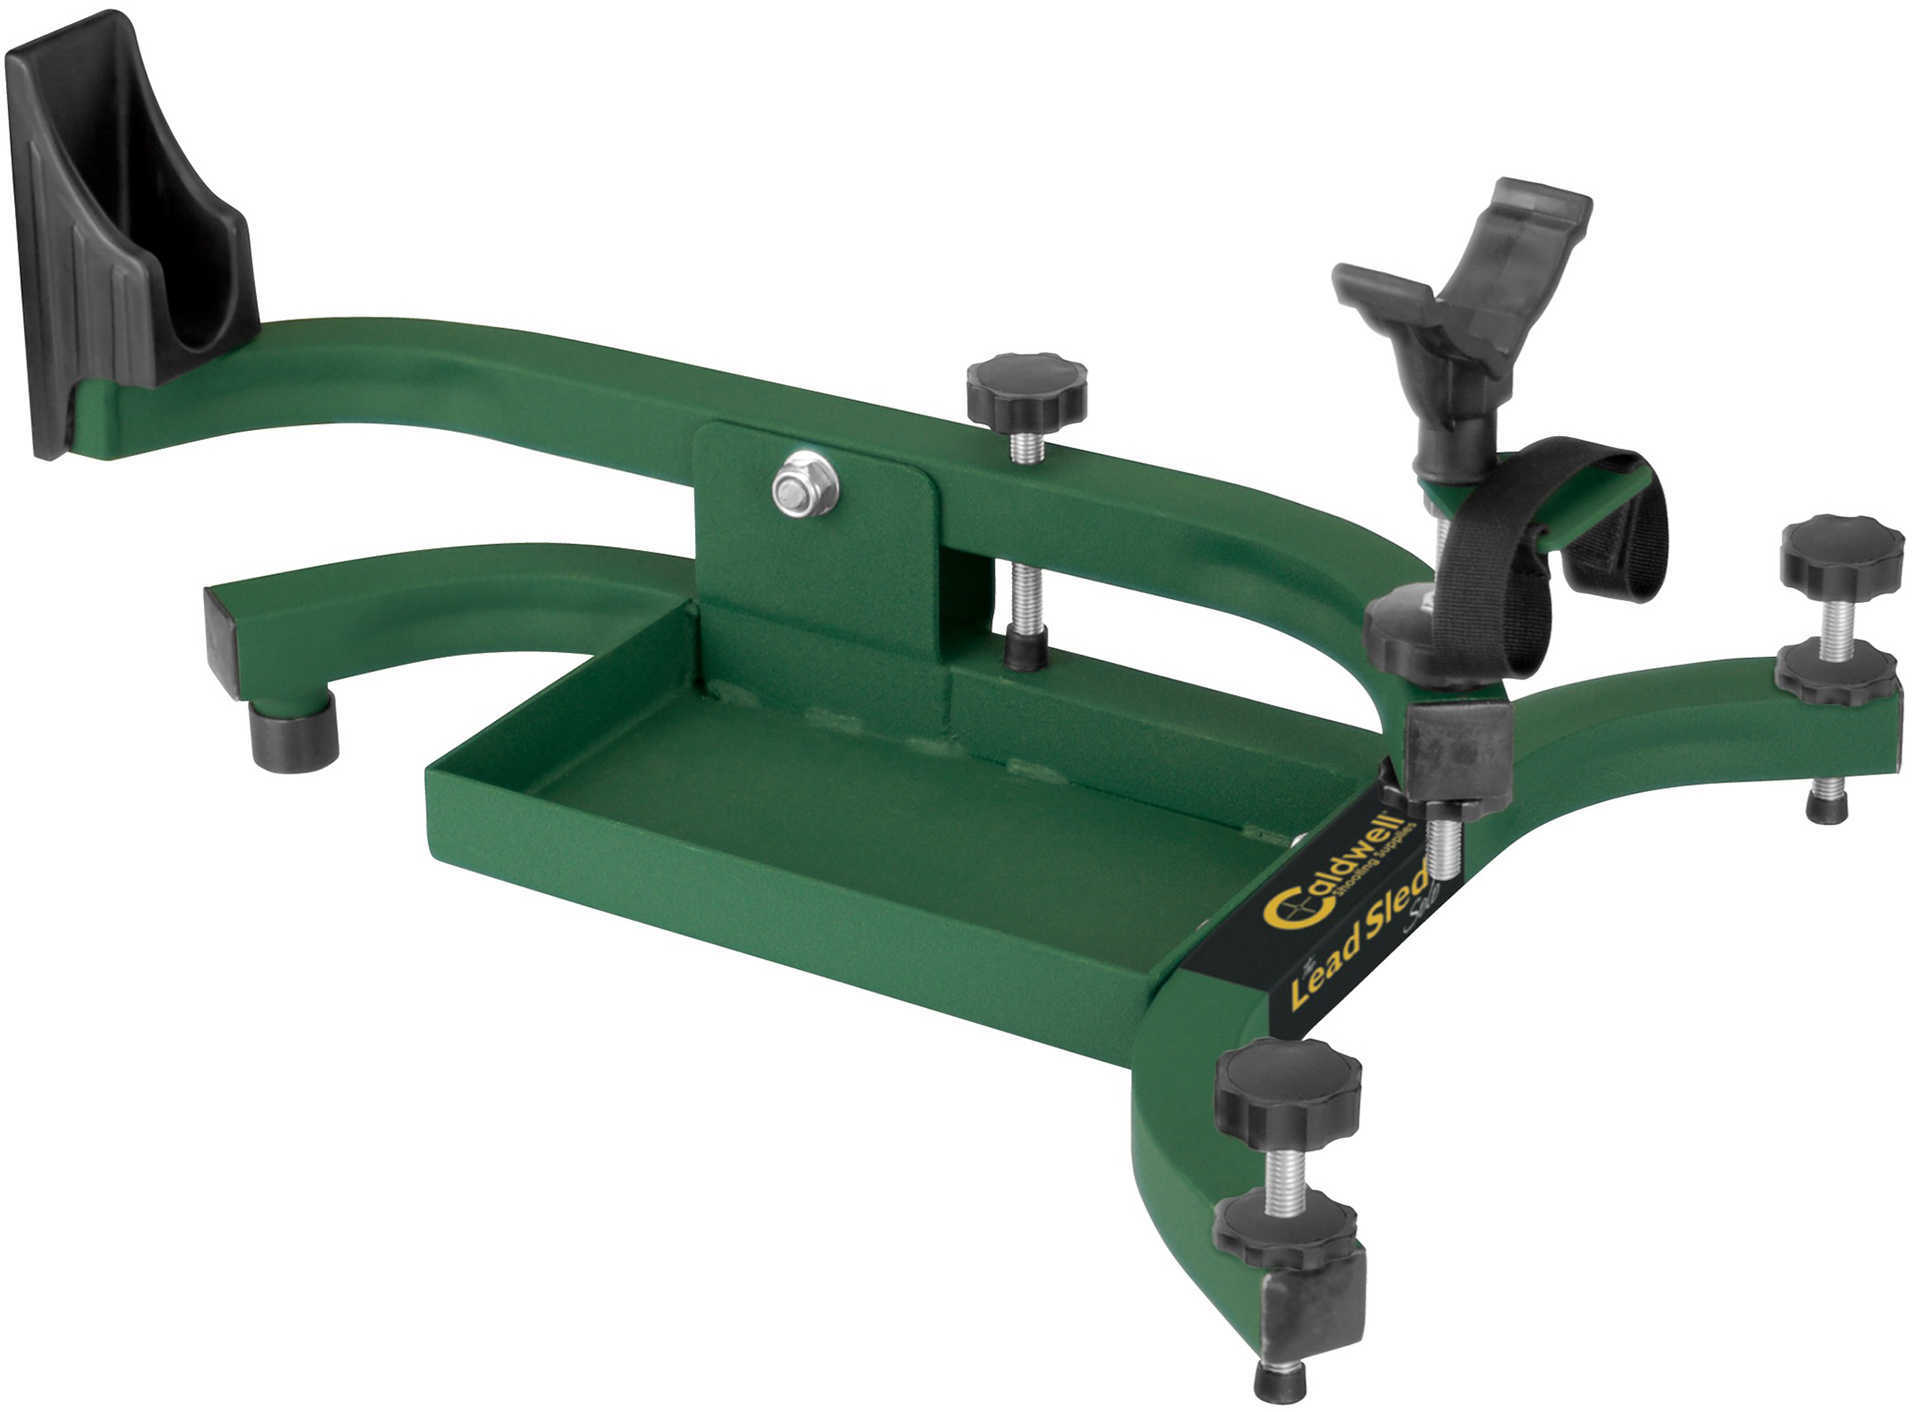 Caldwell The Lead Sled Shooting Rest Universal Fit Adjustable Green Finish 101-777